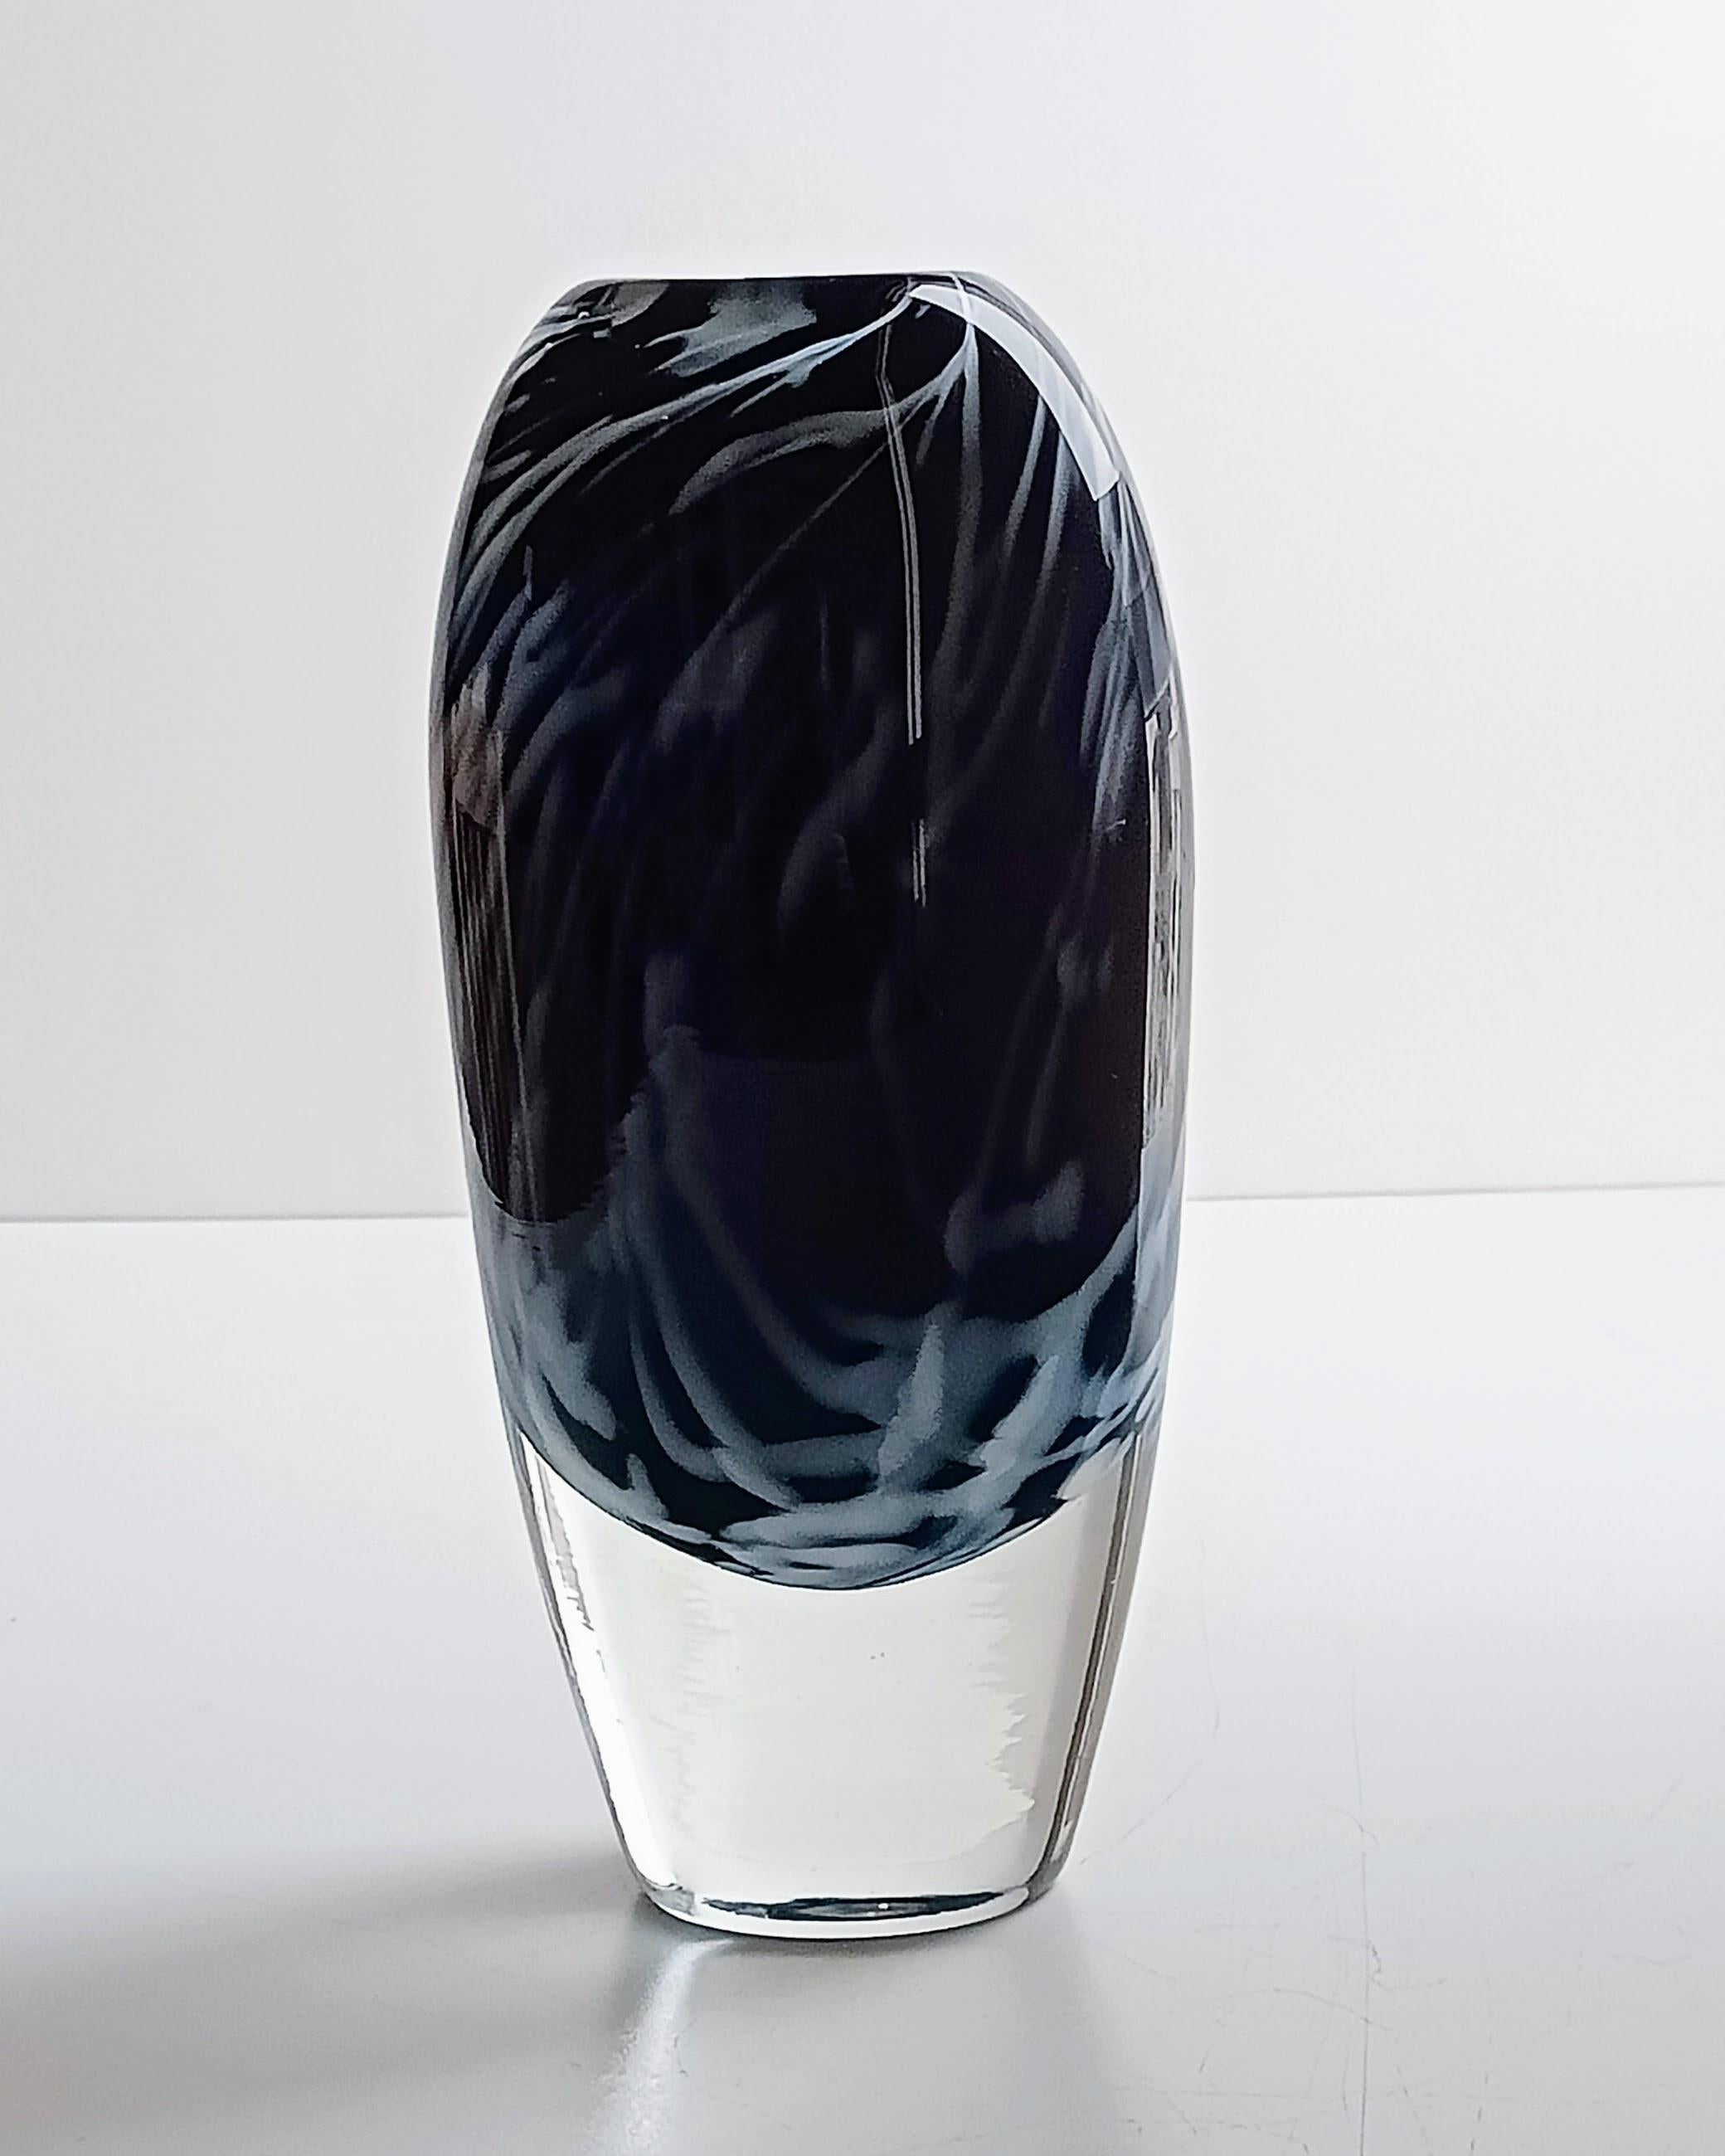 Scandinavian Modern art glass by Orrefors, designed by Walter Johansson and dating back to the mid-century period, represents some of the finest examples of glass artistry from that era. Orrefors, a renowned Swedish glassworks company, has long been